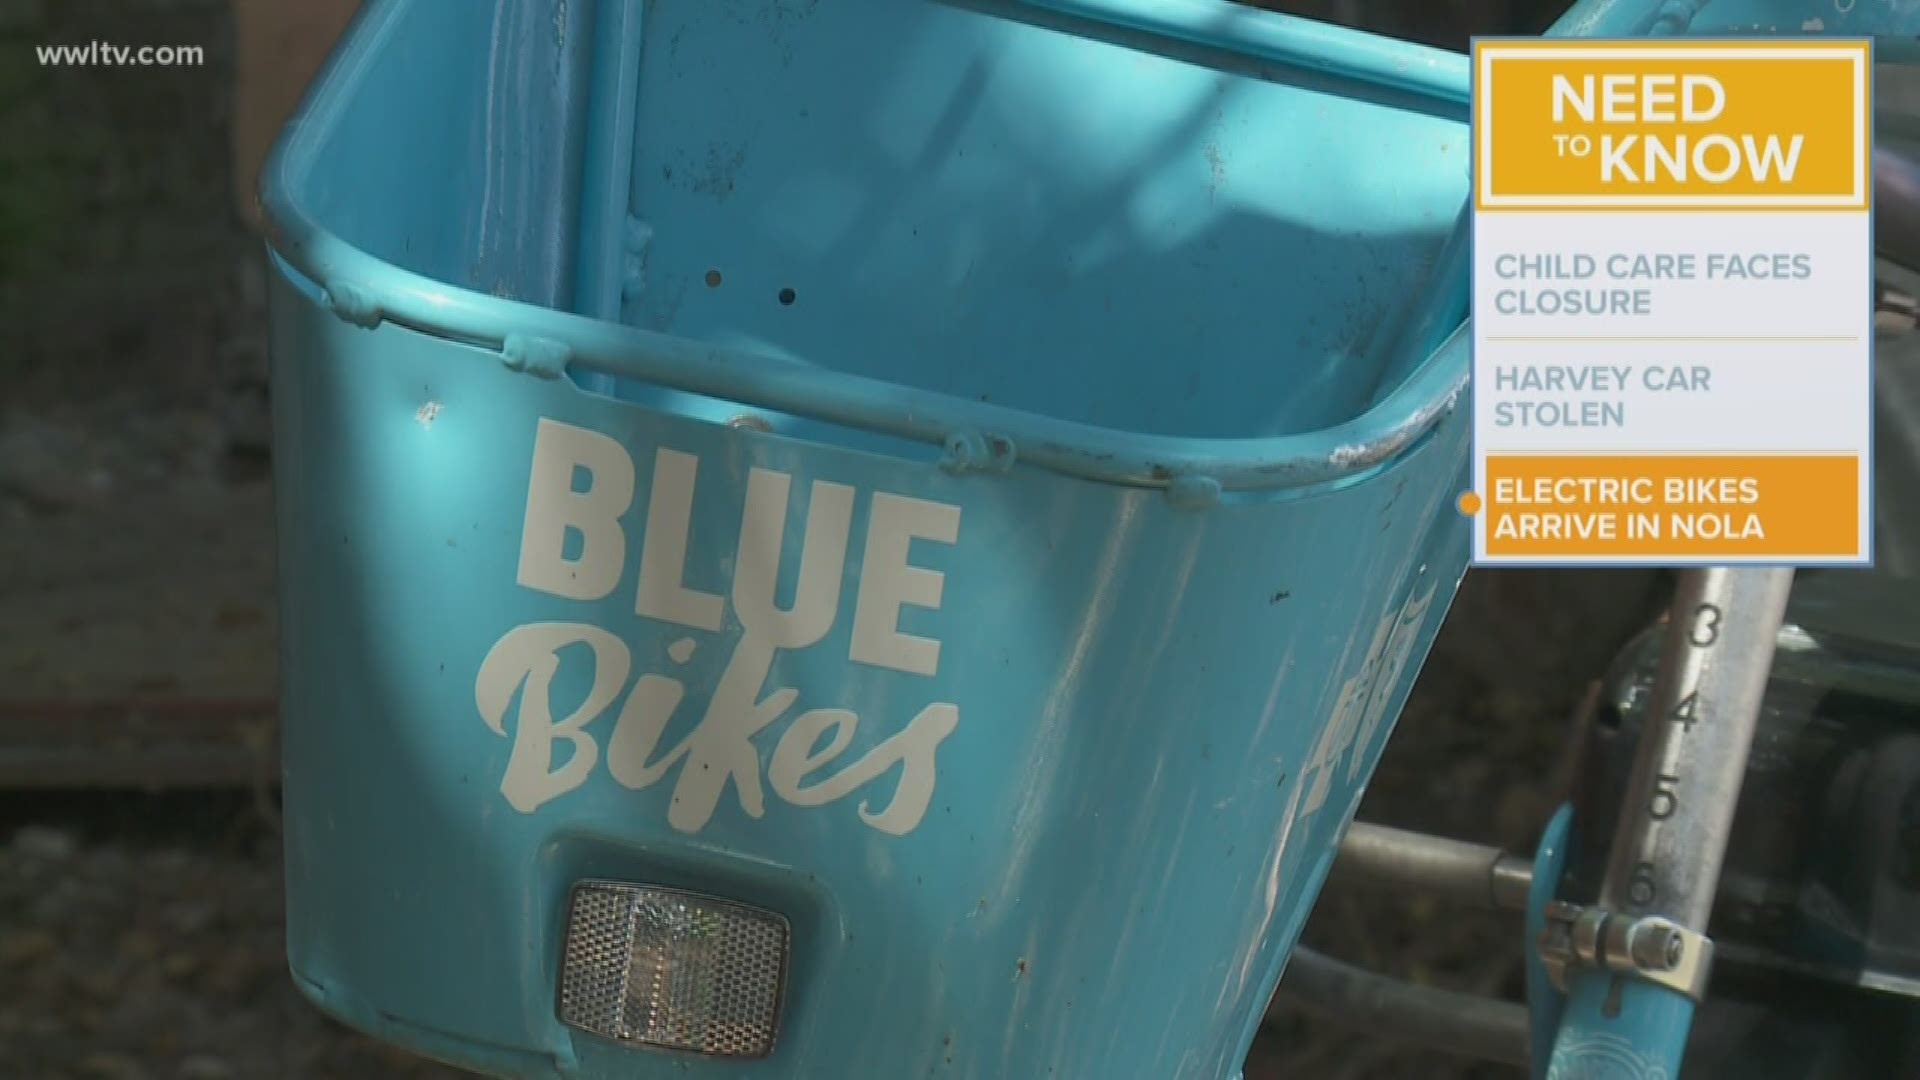 A new batch of Blue Bikes are hitting the streets of New Orleans. The new "Jump" Blue Bikes provide a boost every time you pedal.